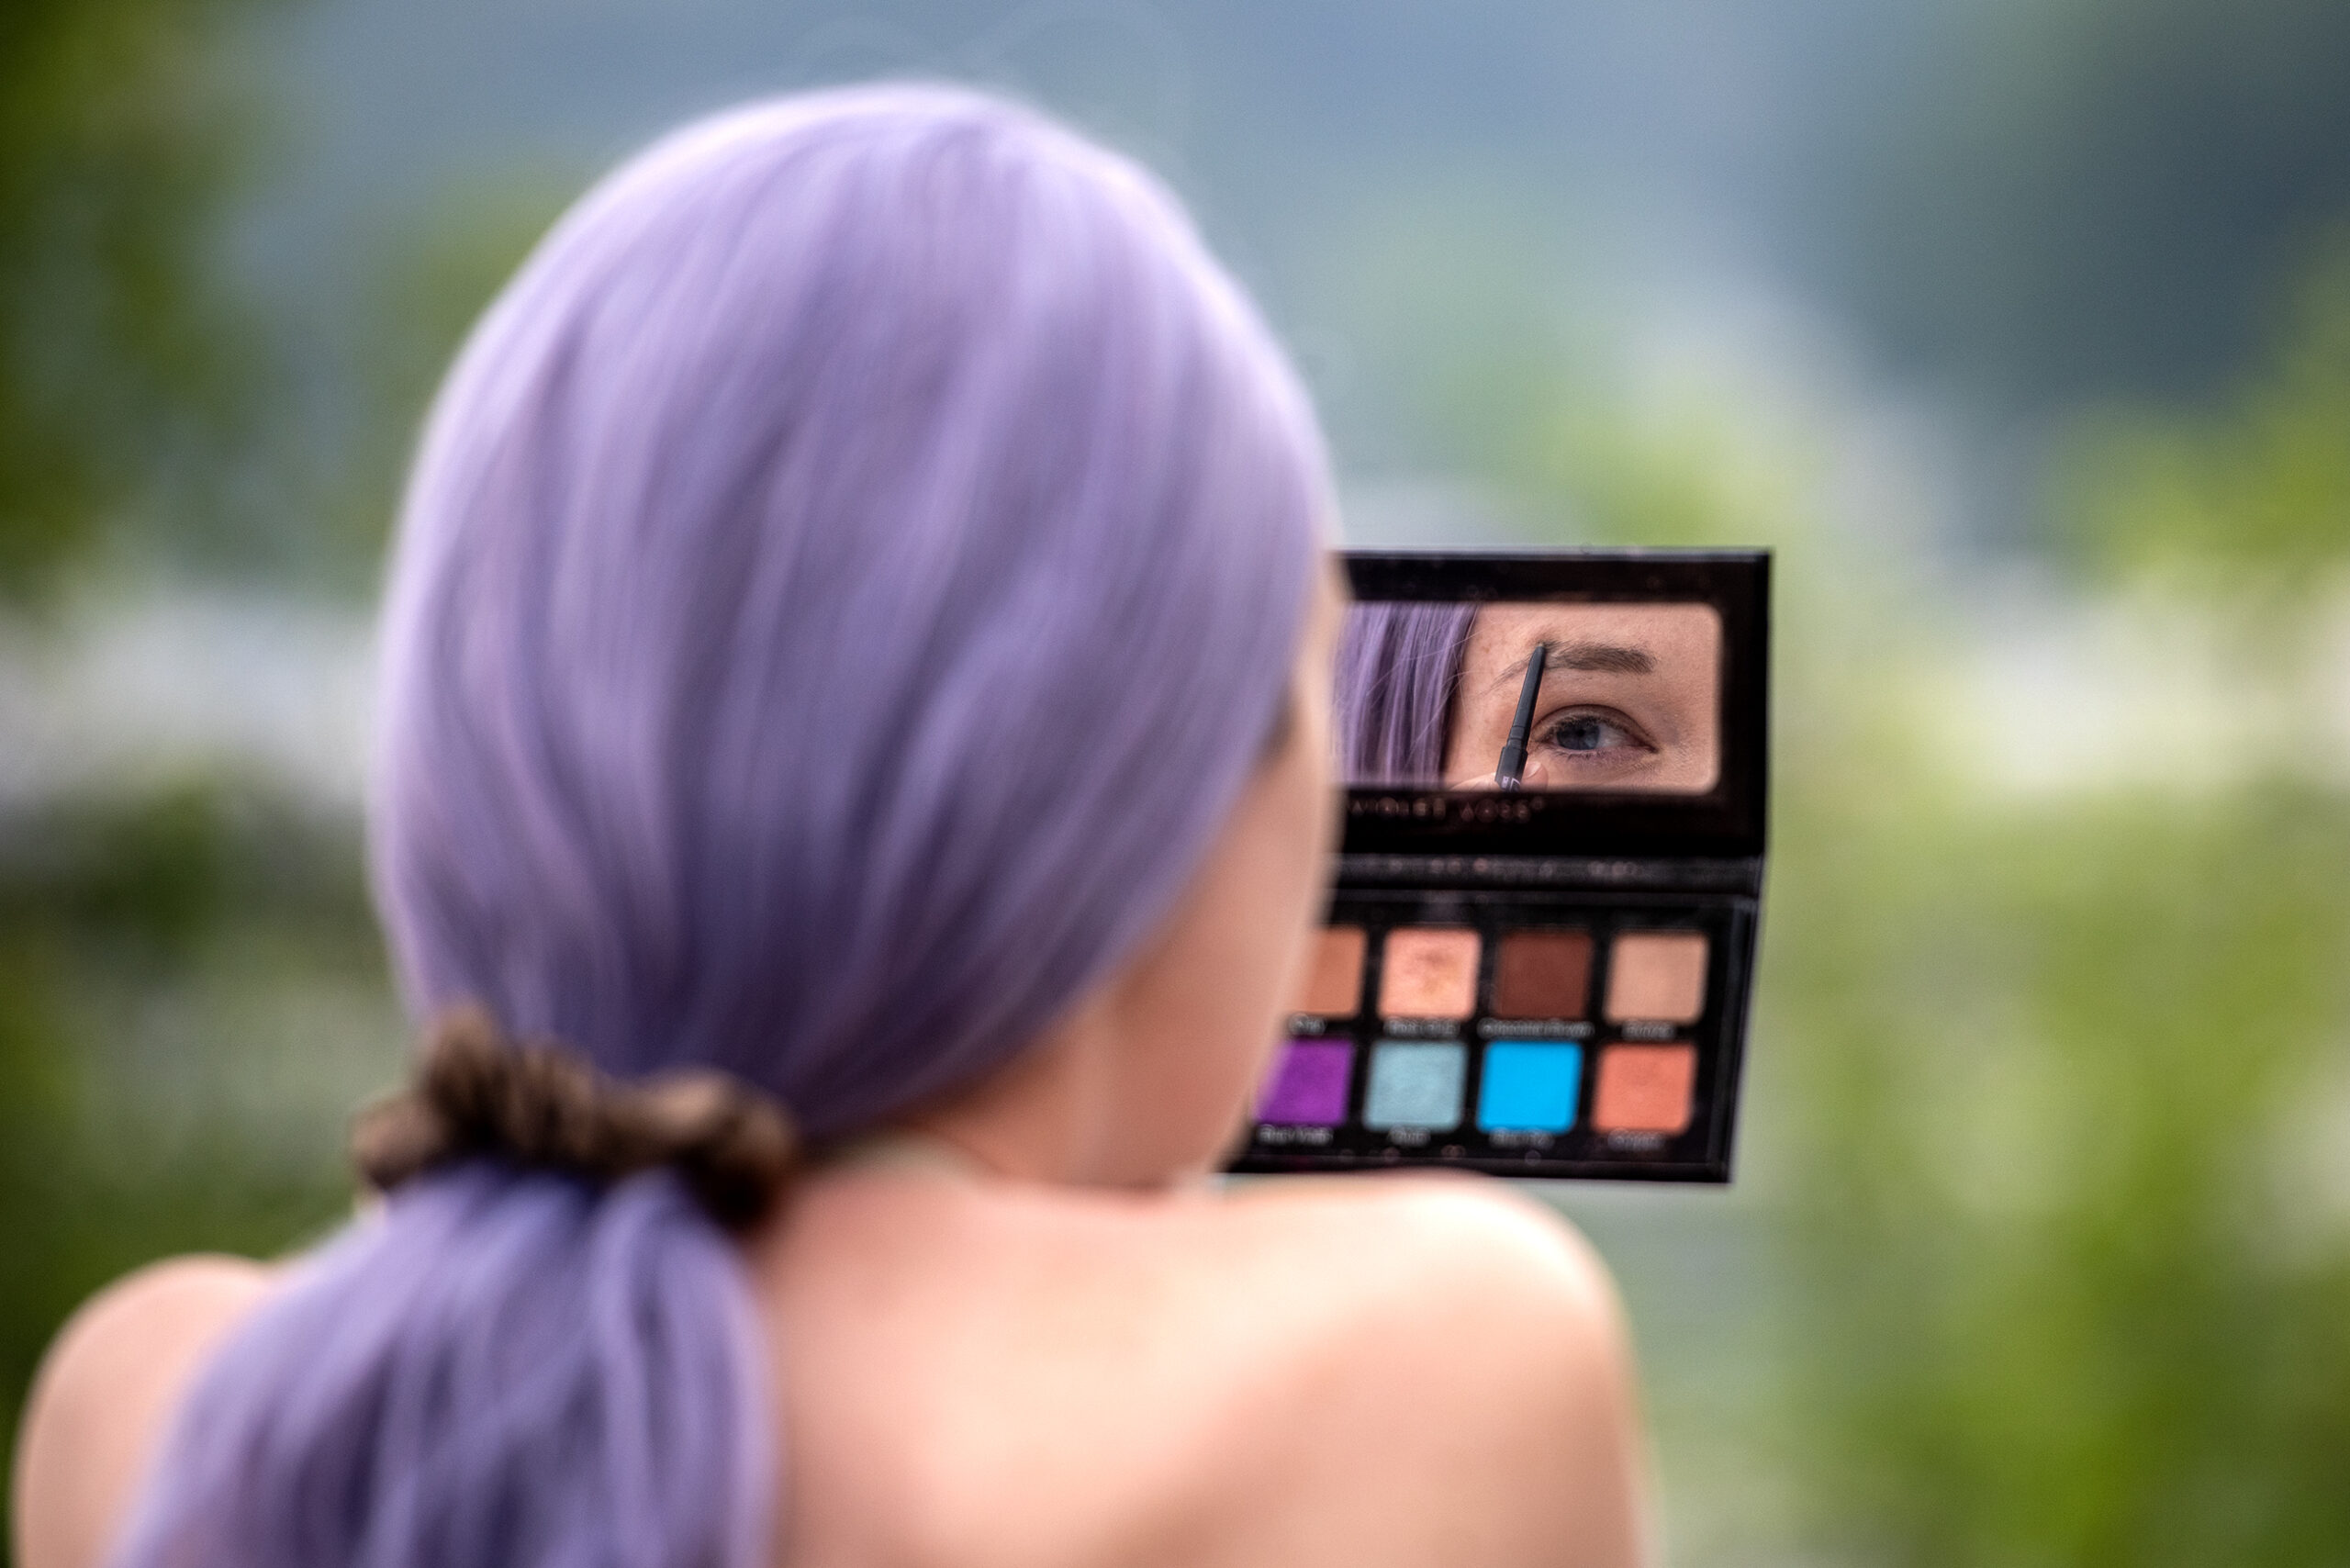 Echo holds an eyeshadow palette as they apply makeup.